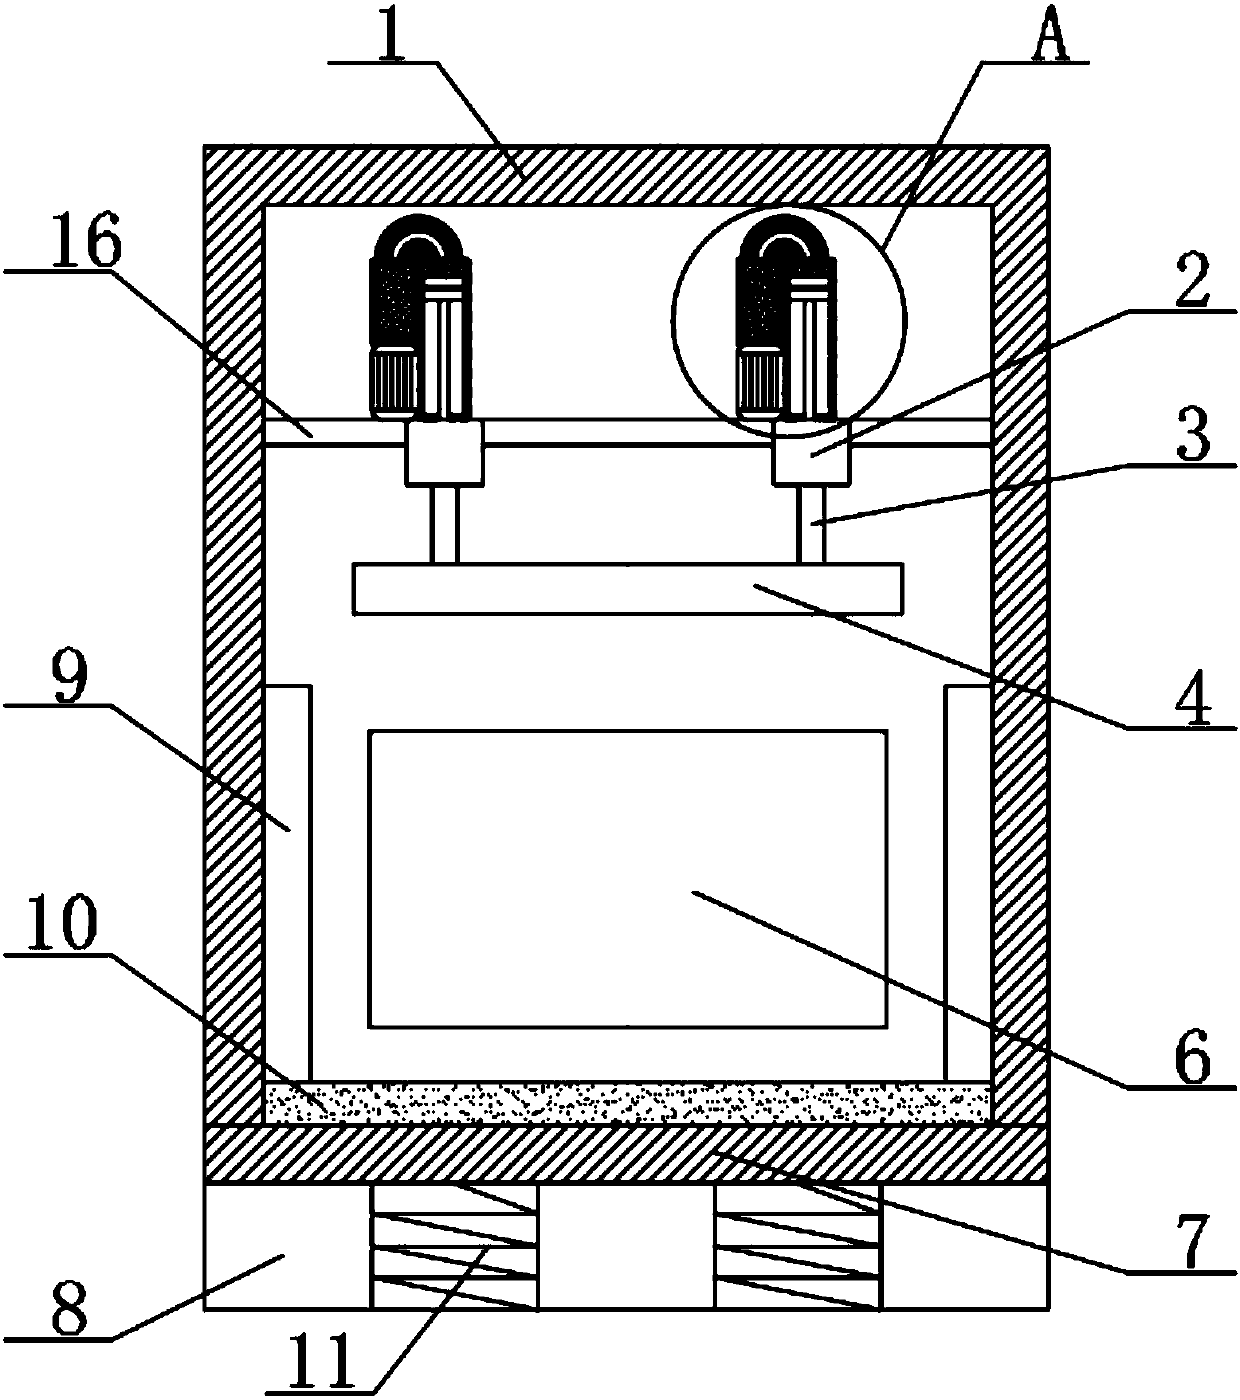 Waste paper box compression and recovery device